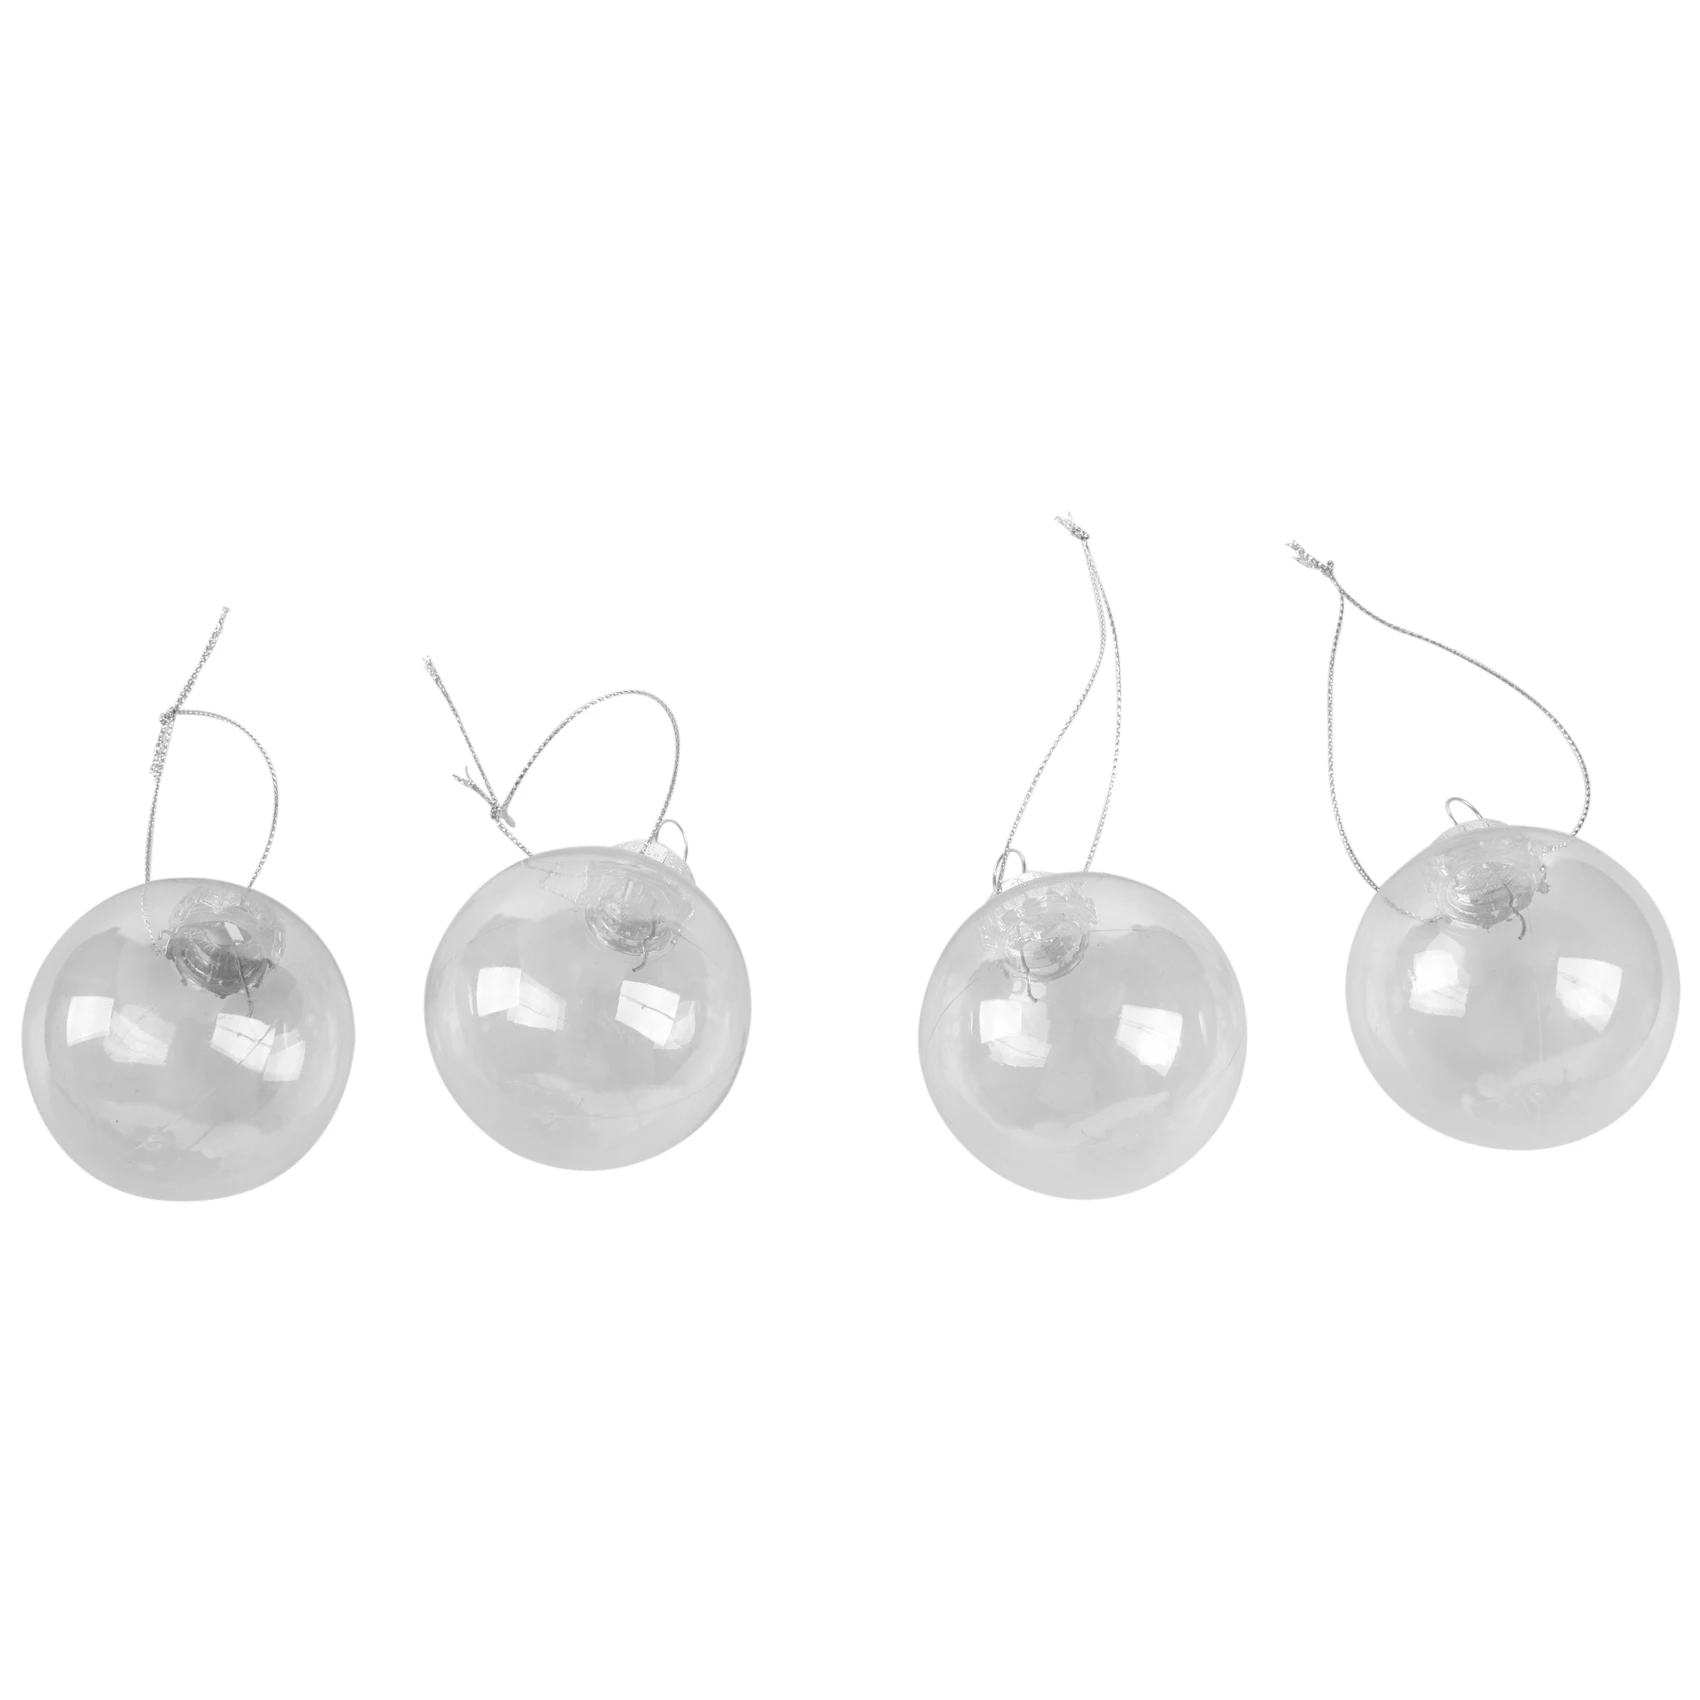 

Clear DIY Baubles Shatterproof Seamless Plastic XMAS Ball Home Tree Decor Gift - 60Mm QTY:4